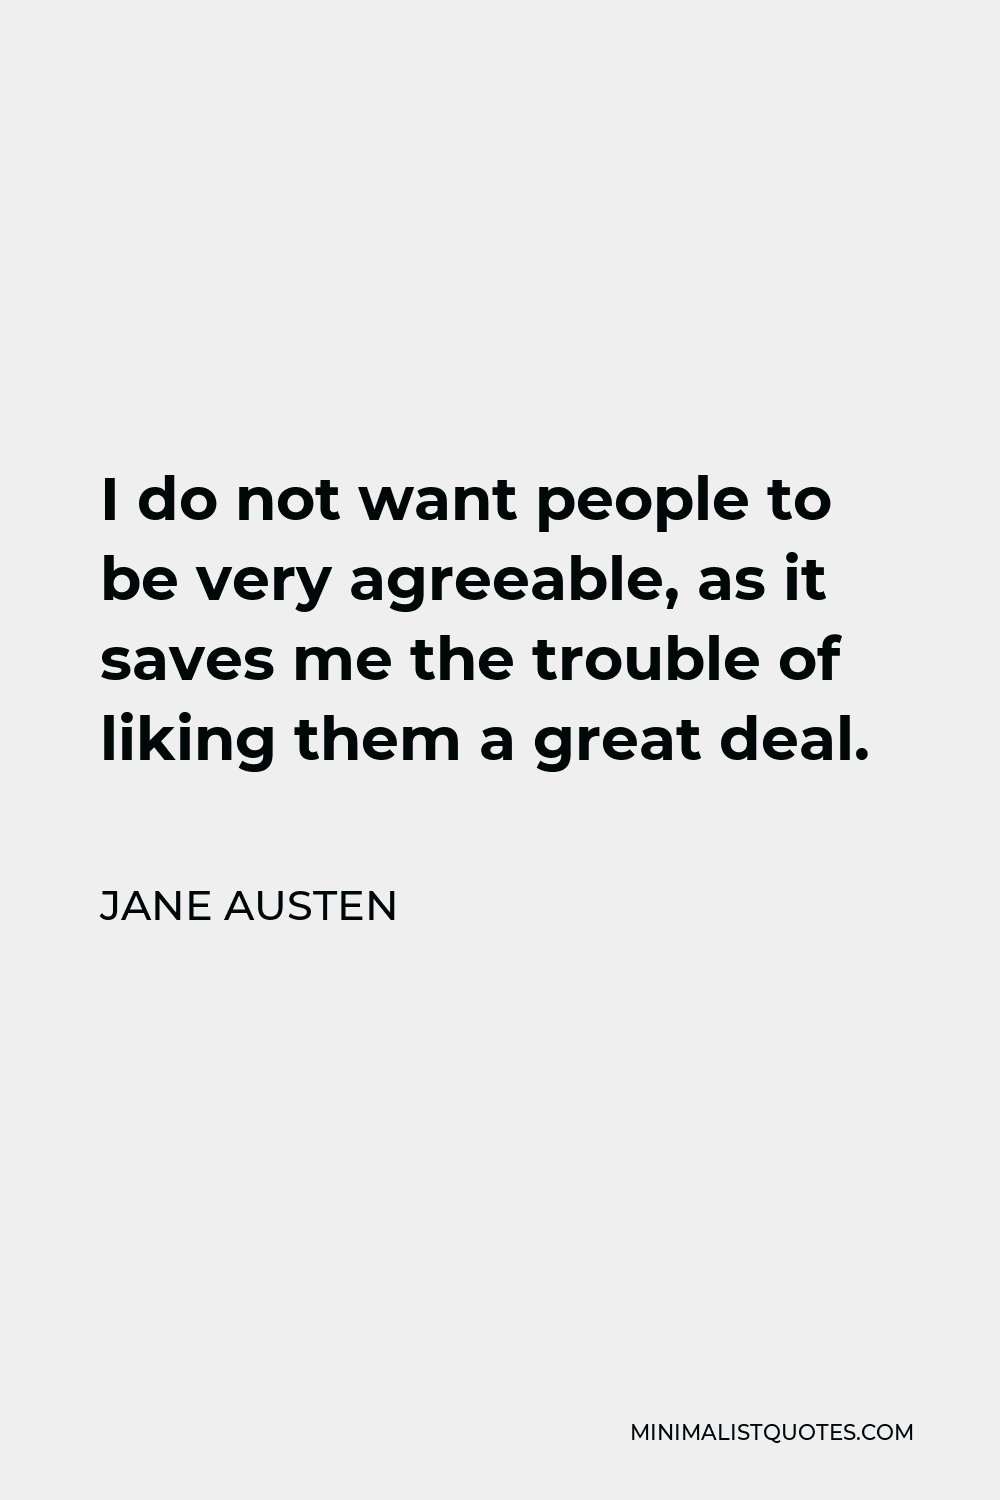 Jane Austen Quote - I do not want people to be very agreeable, as it saves me the trouble of liking them a great deal.